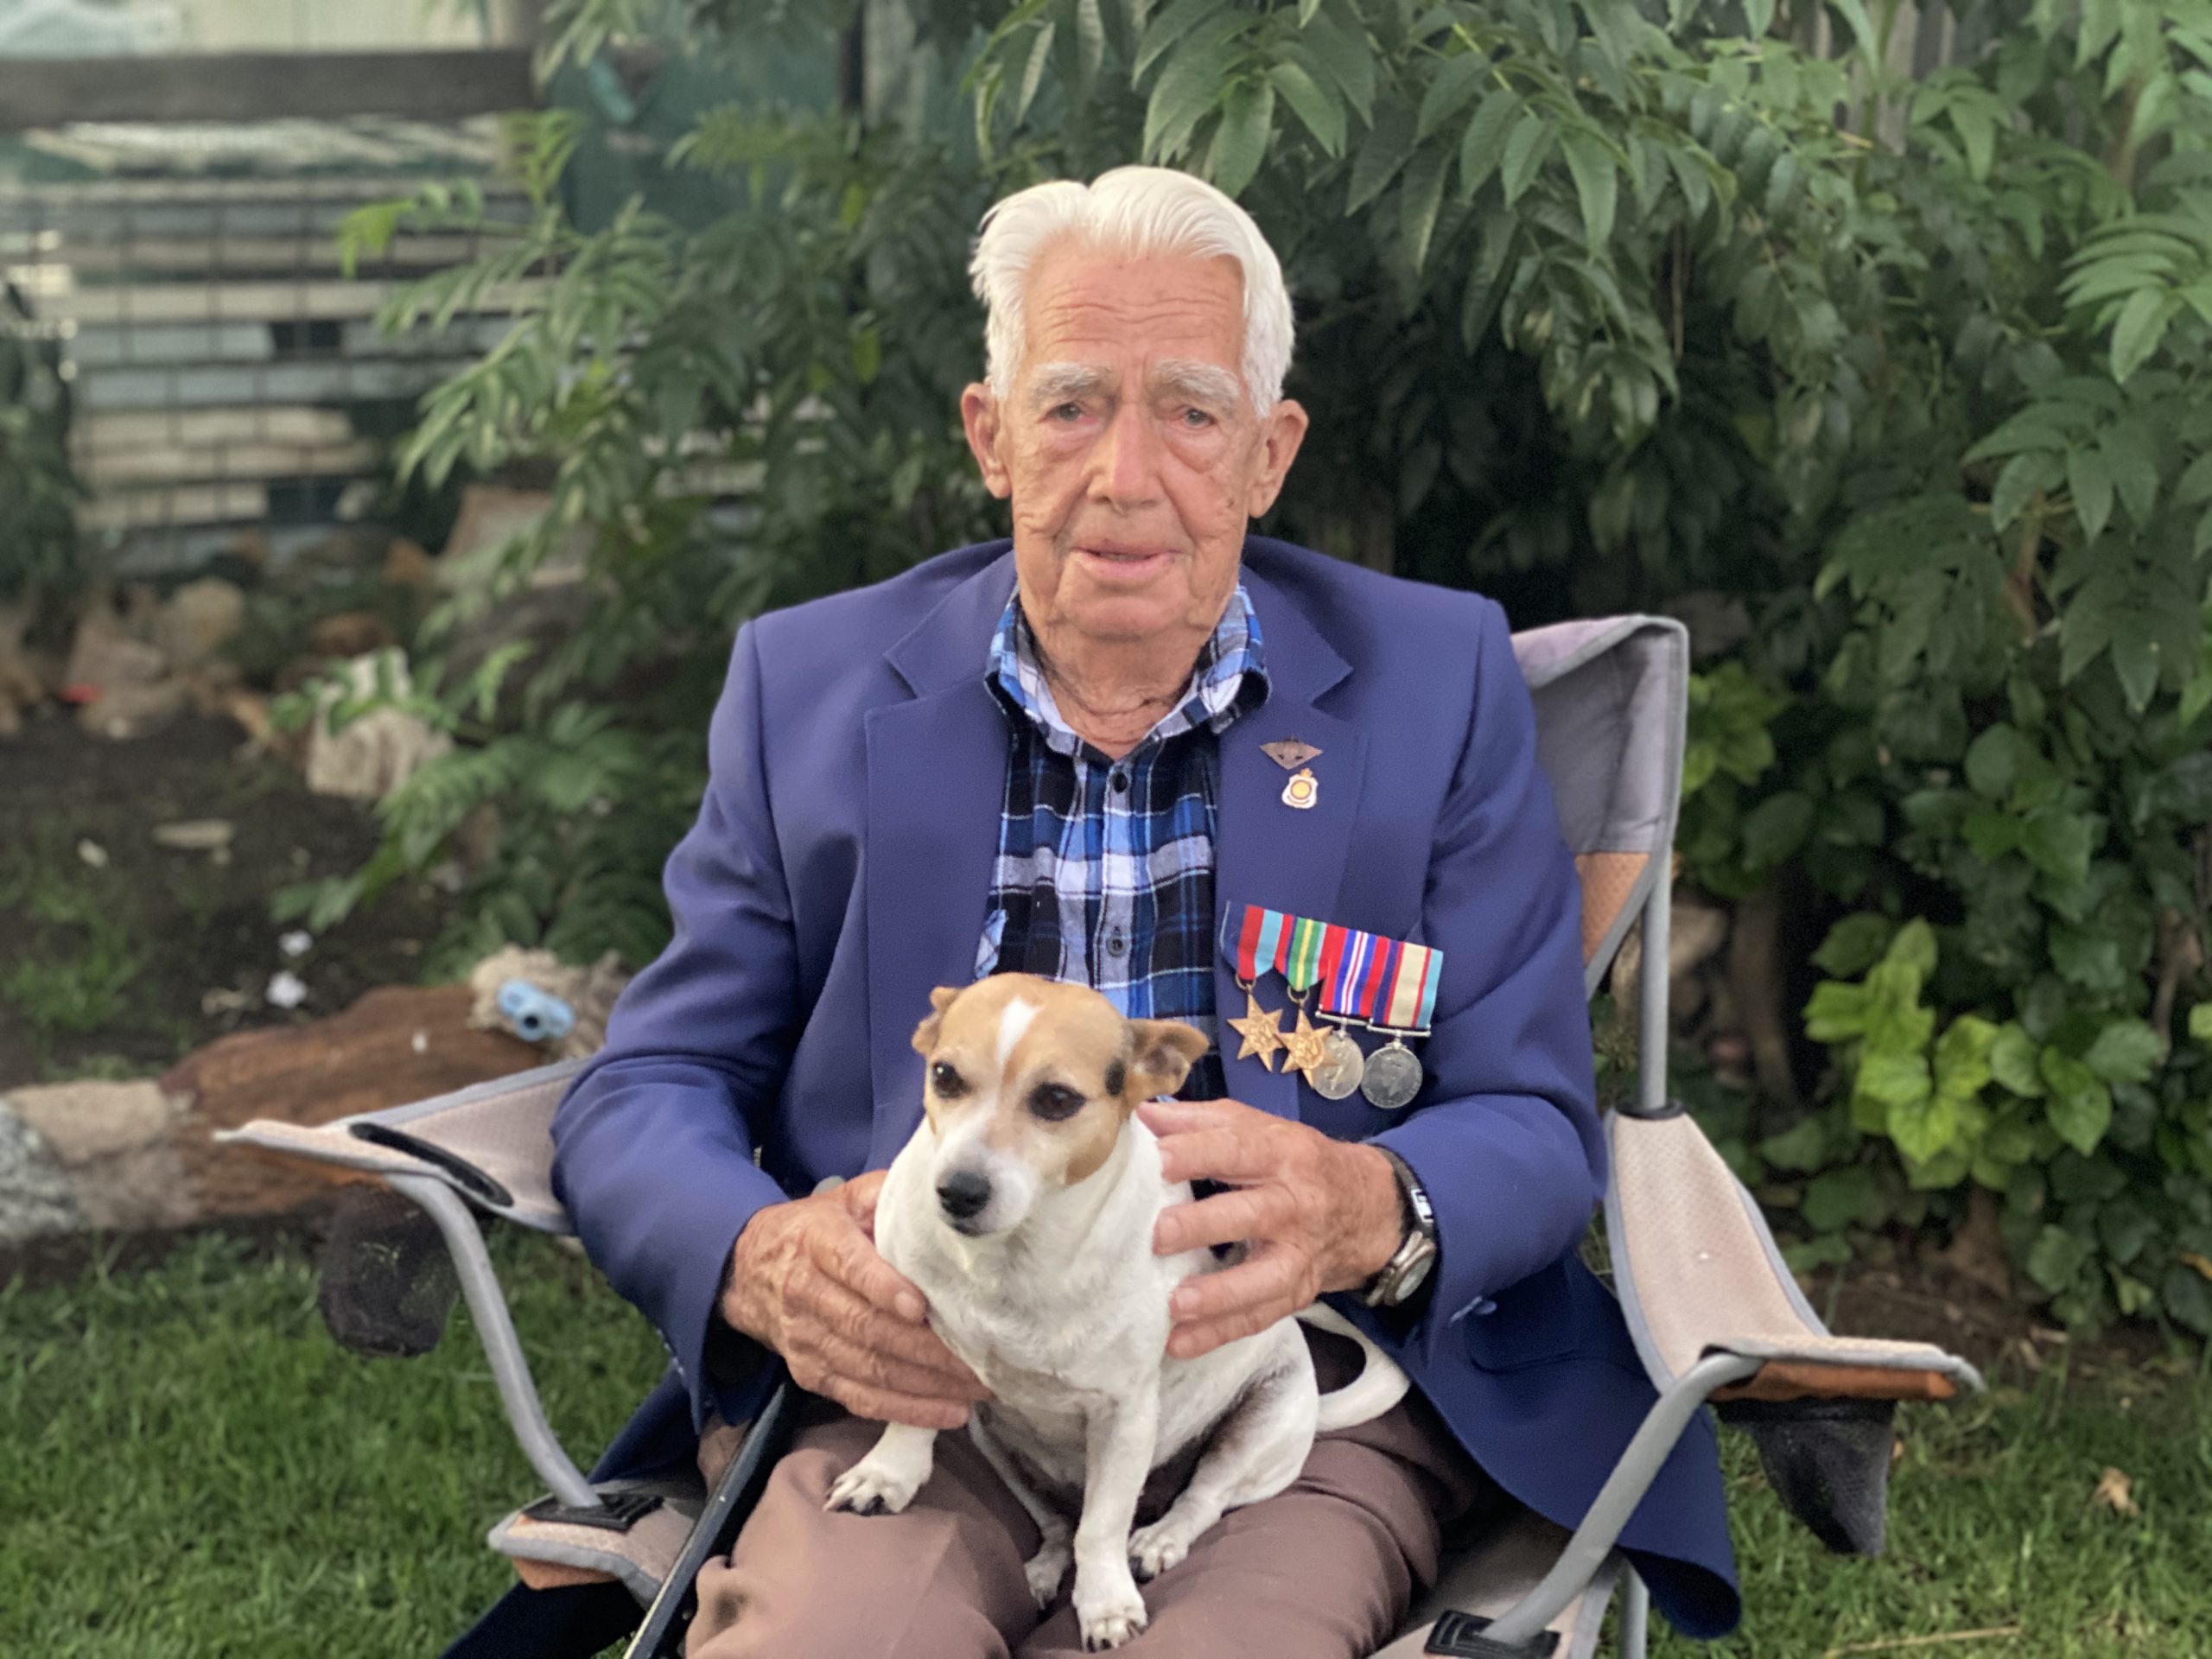 Veteran John Collett shares his story on the 75th anniversary of Victory in the Pacific